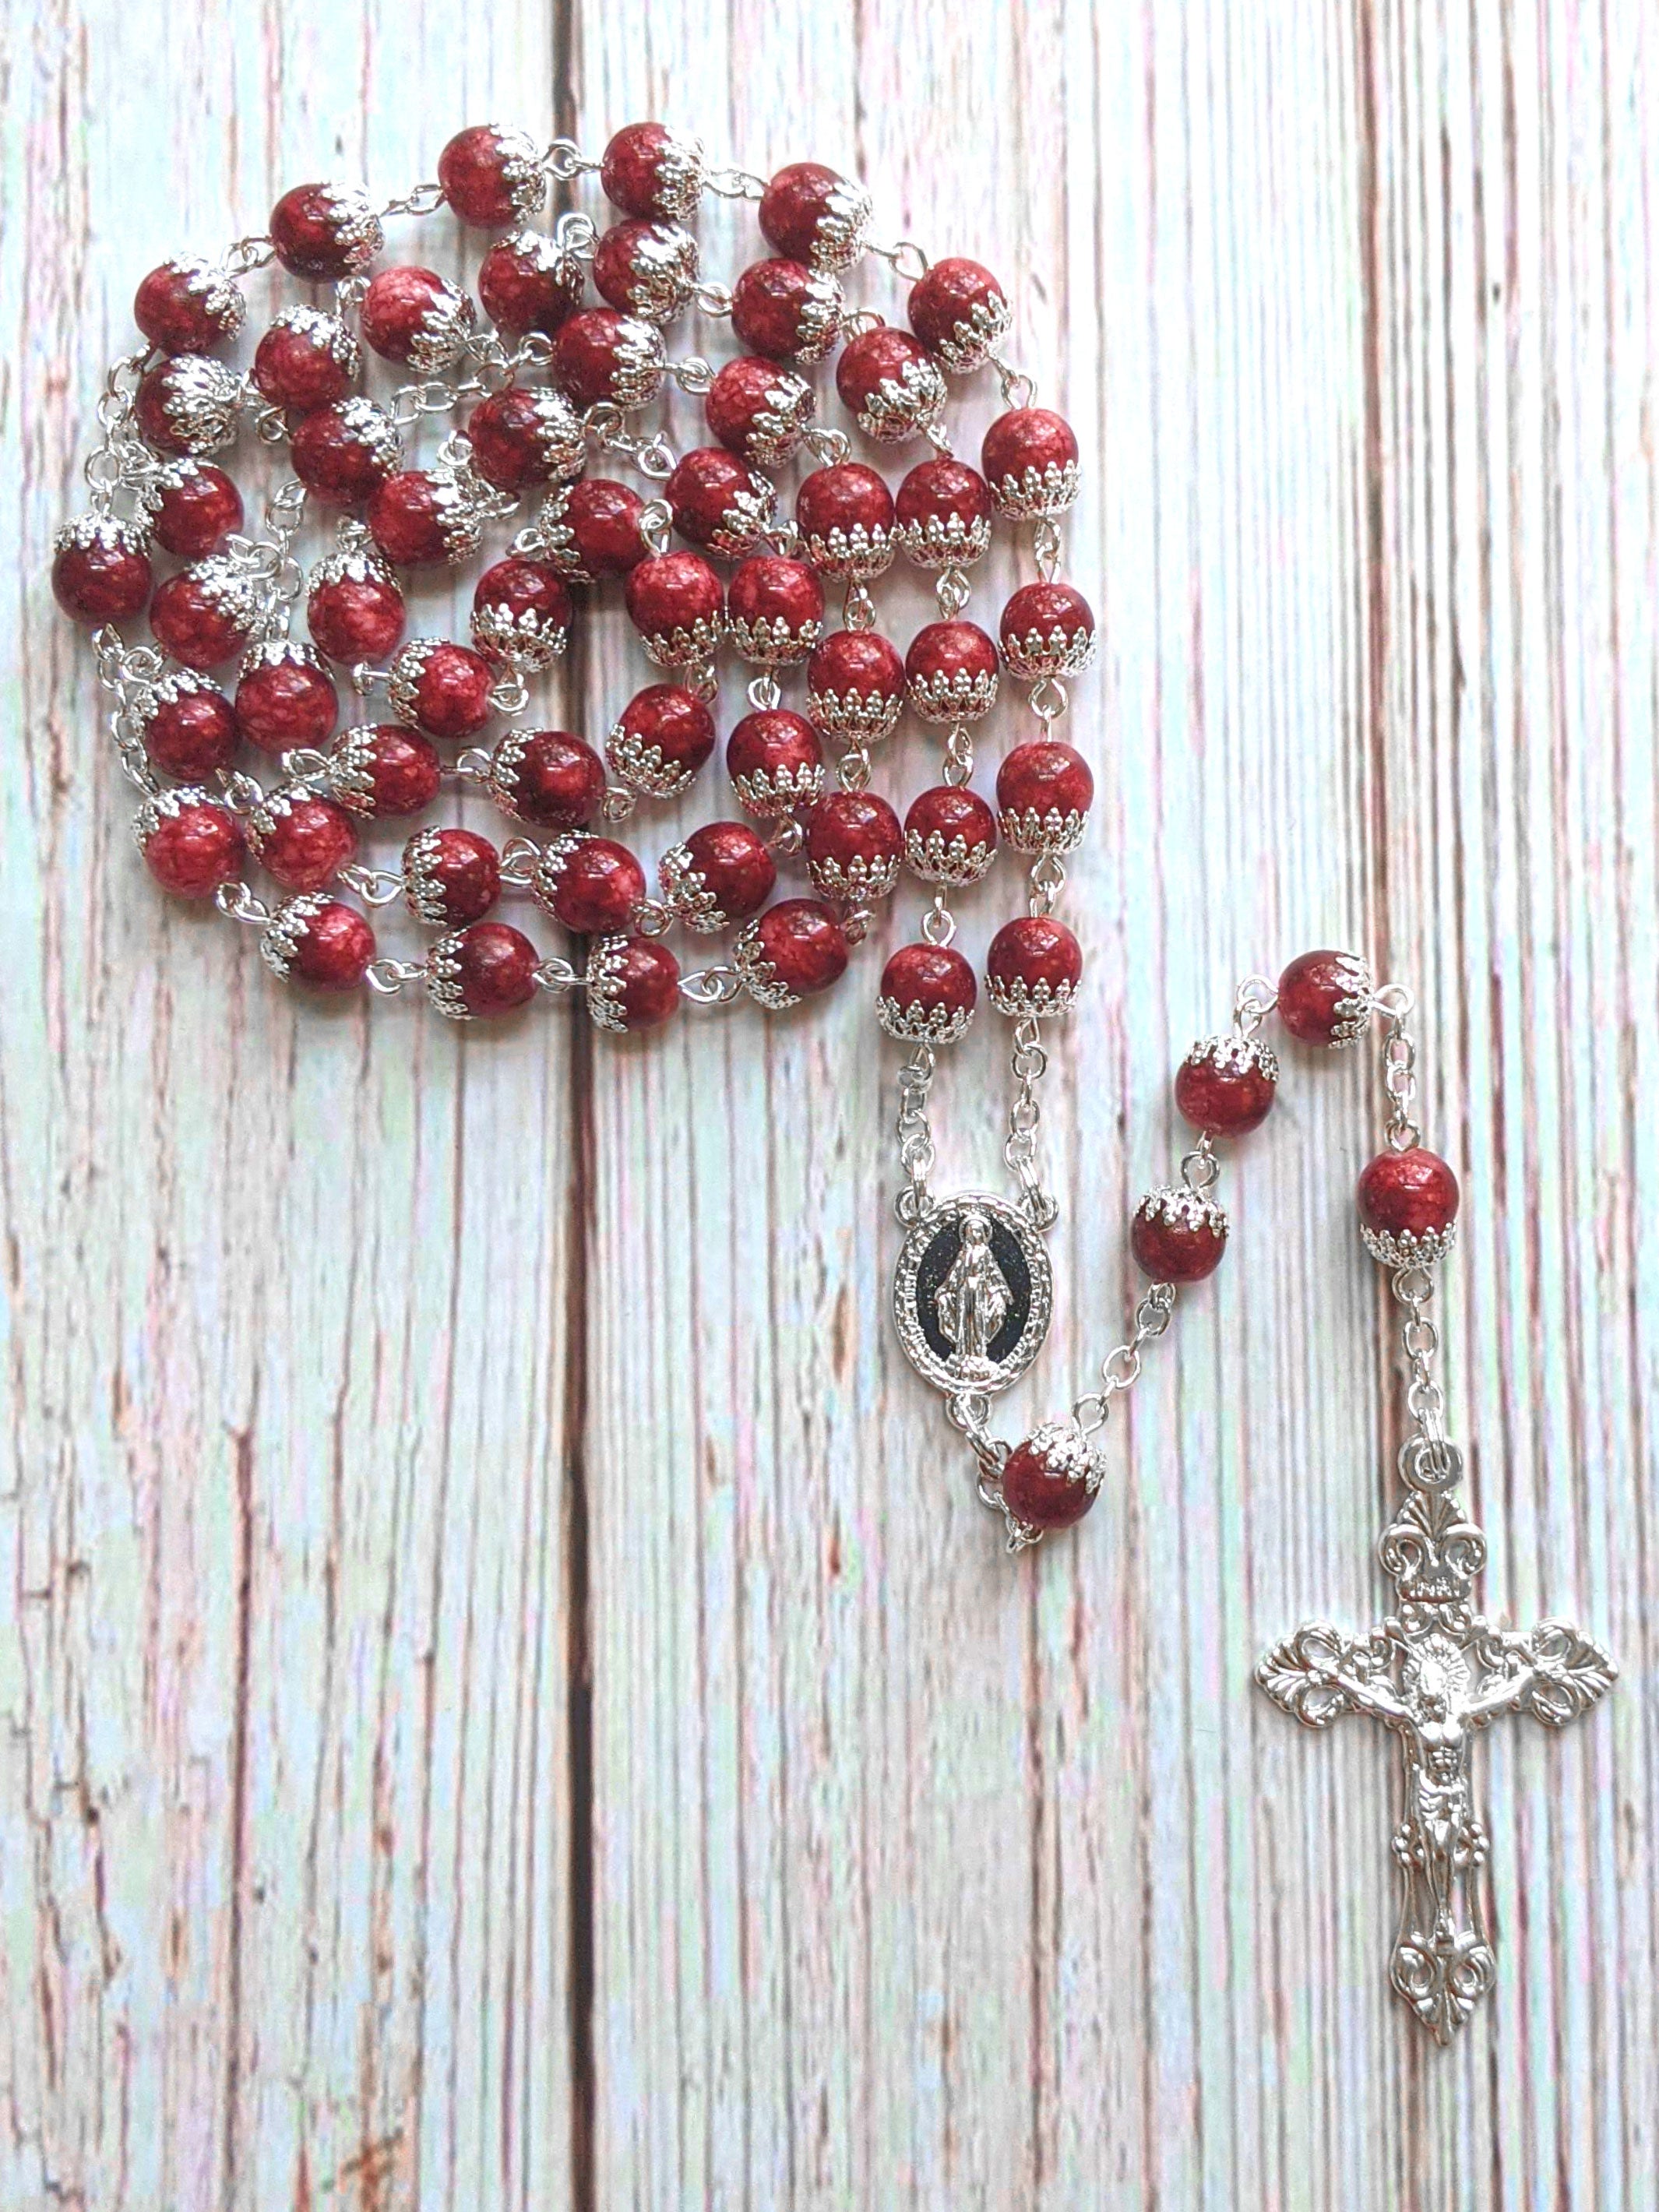 Handmade 8mm Red Glass Beads Our Lady of Fatima Rosary